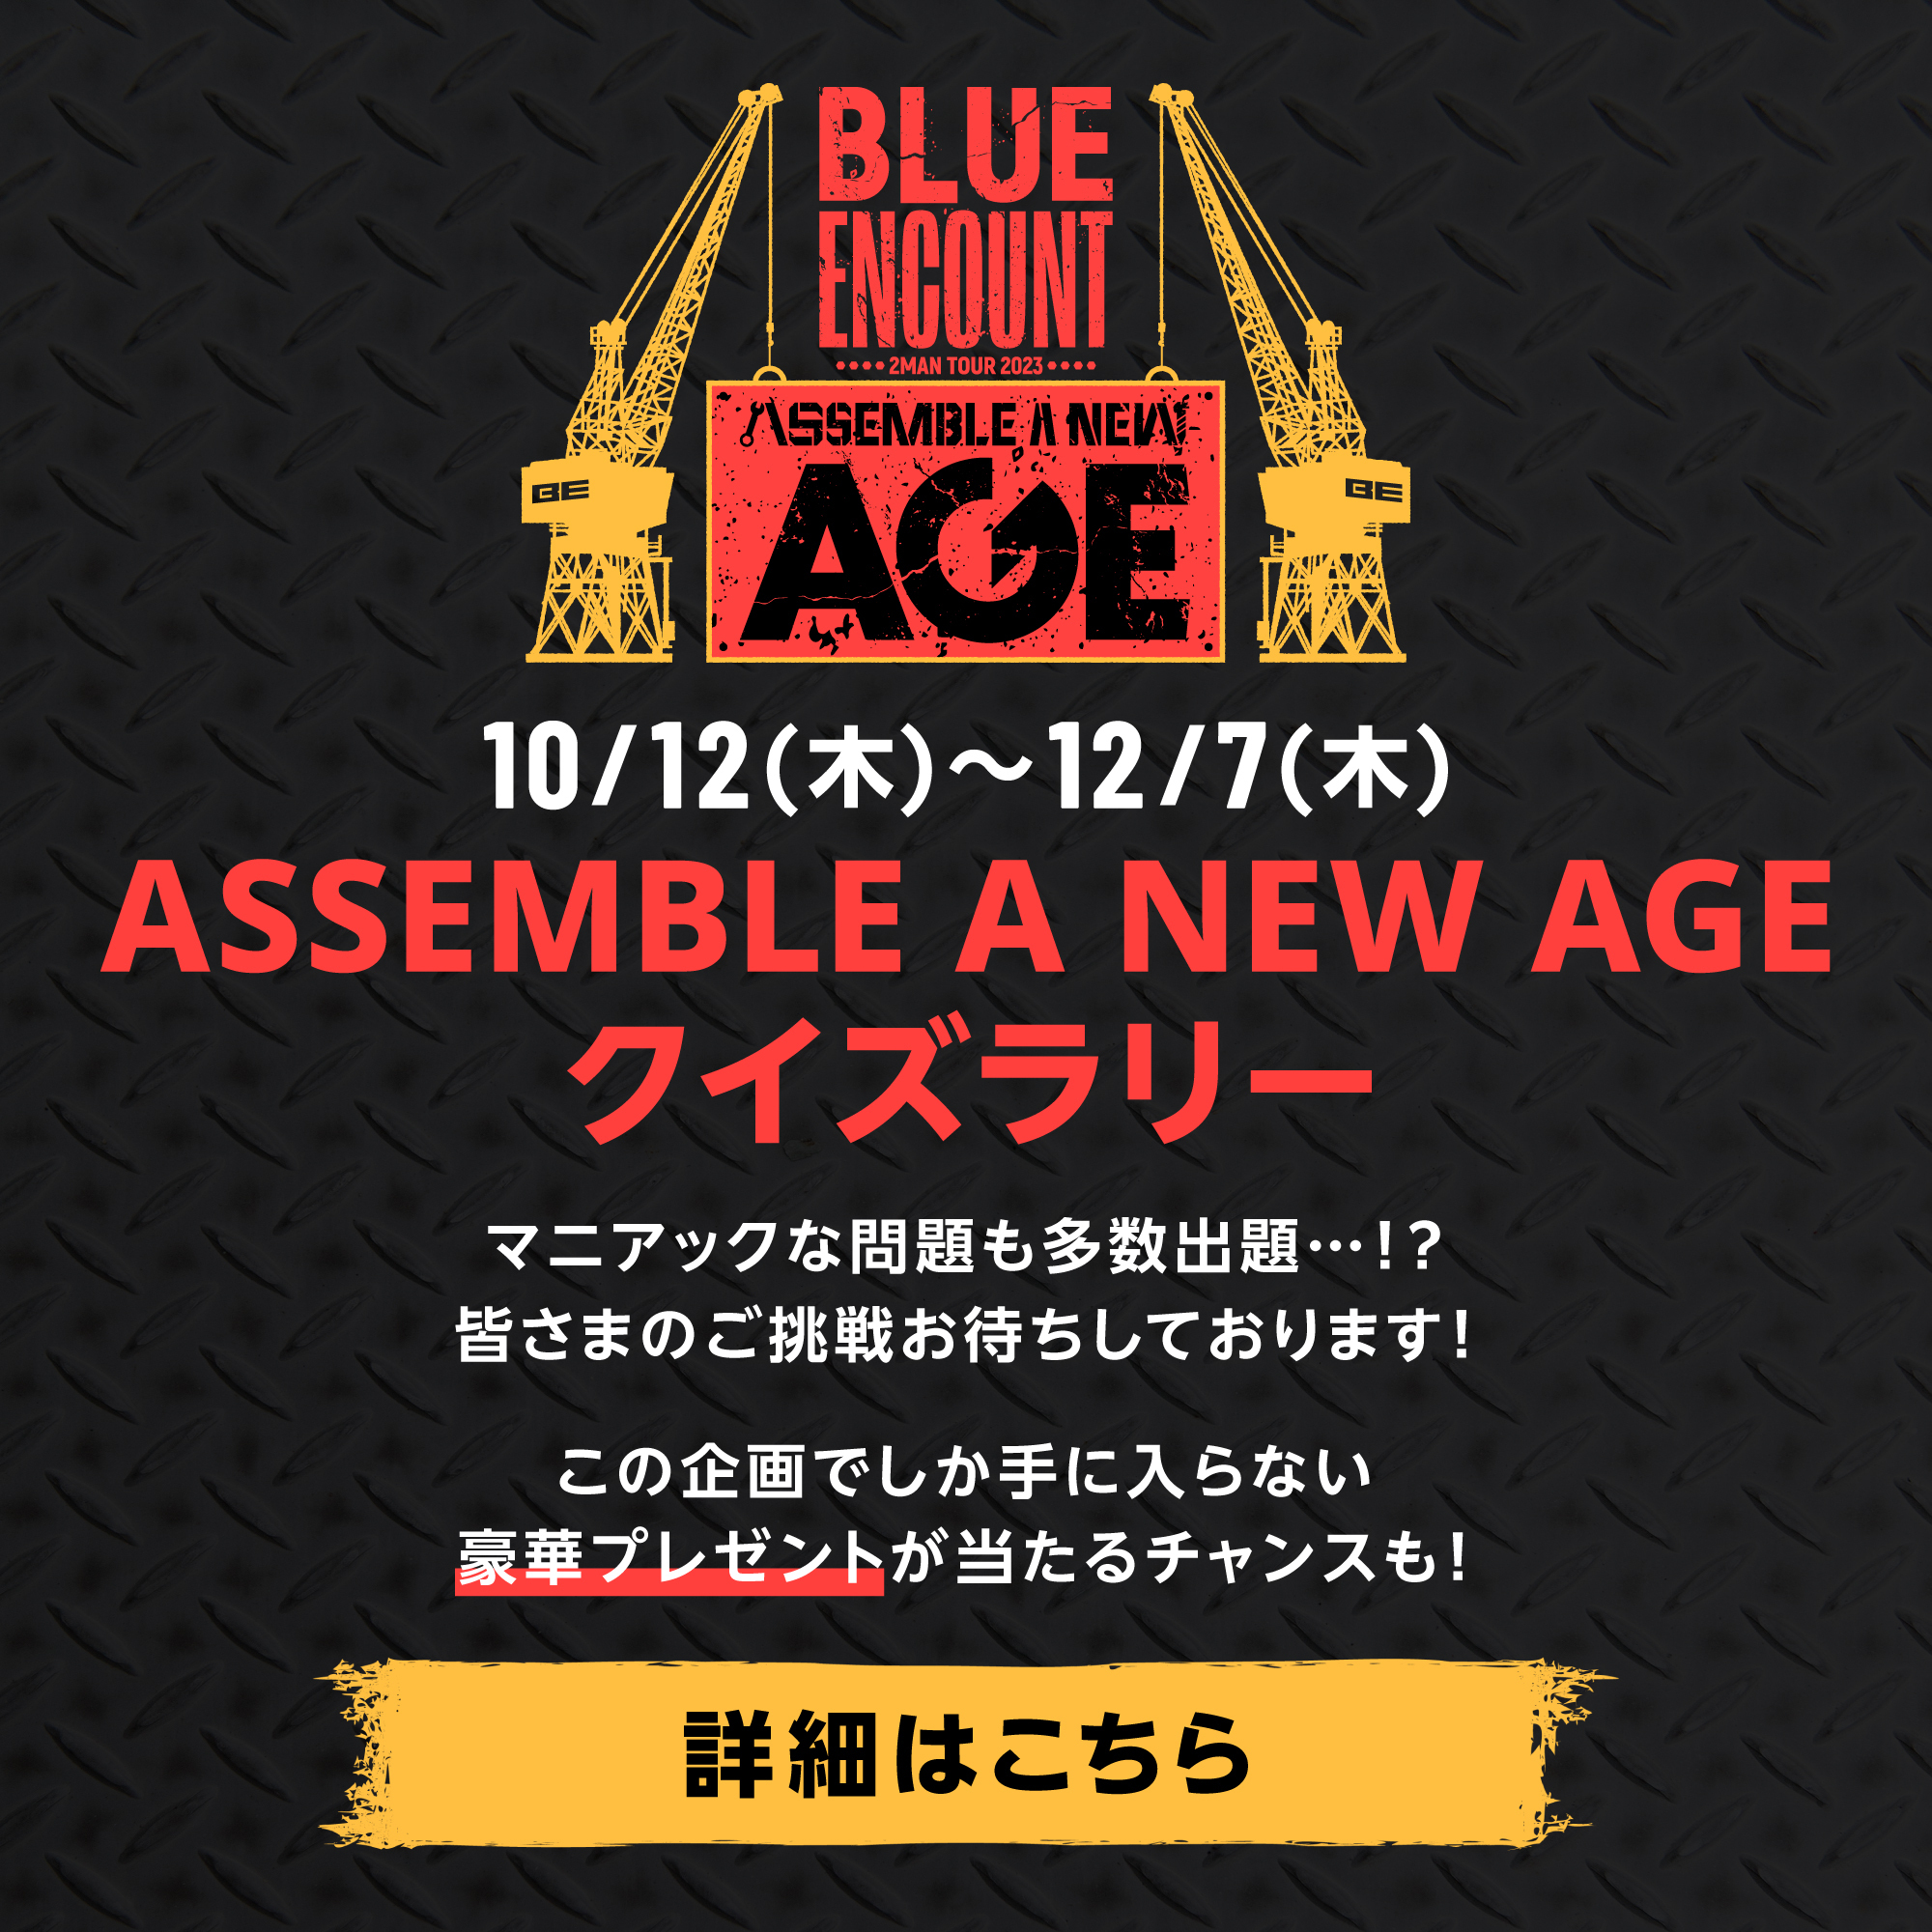 ASSEMBLE A NEW AGE クイズラリー